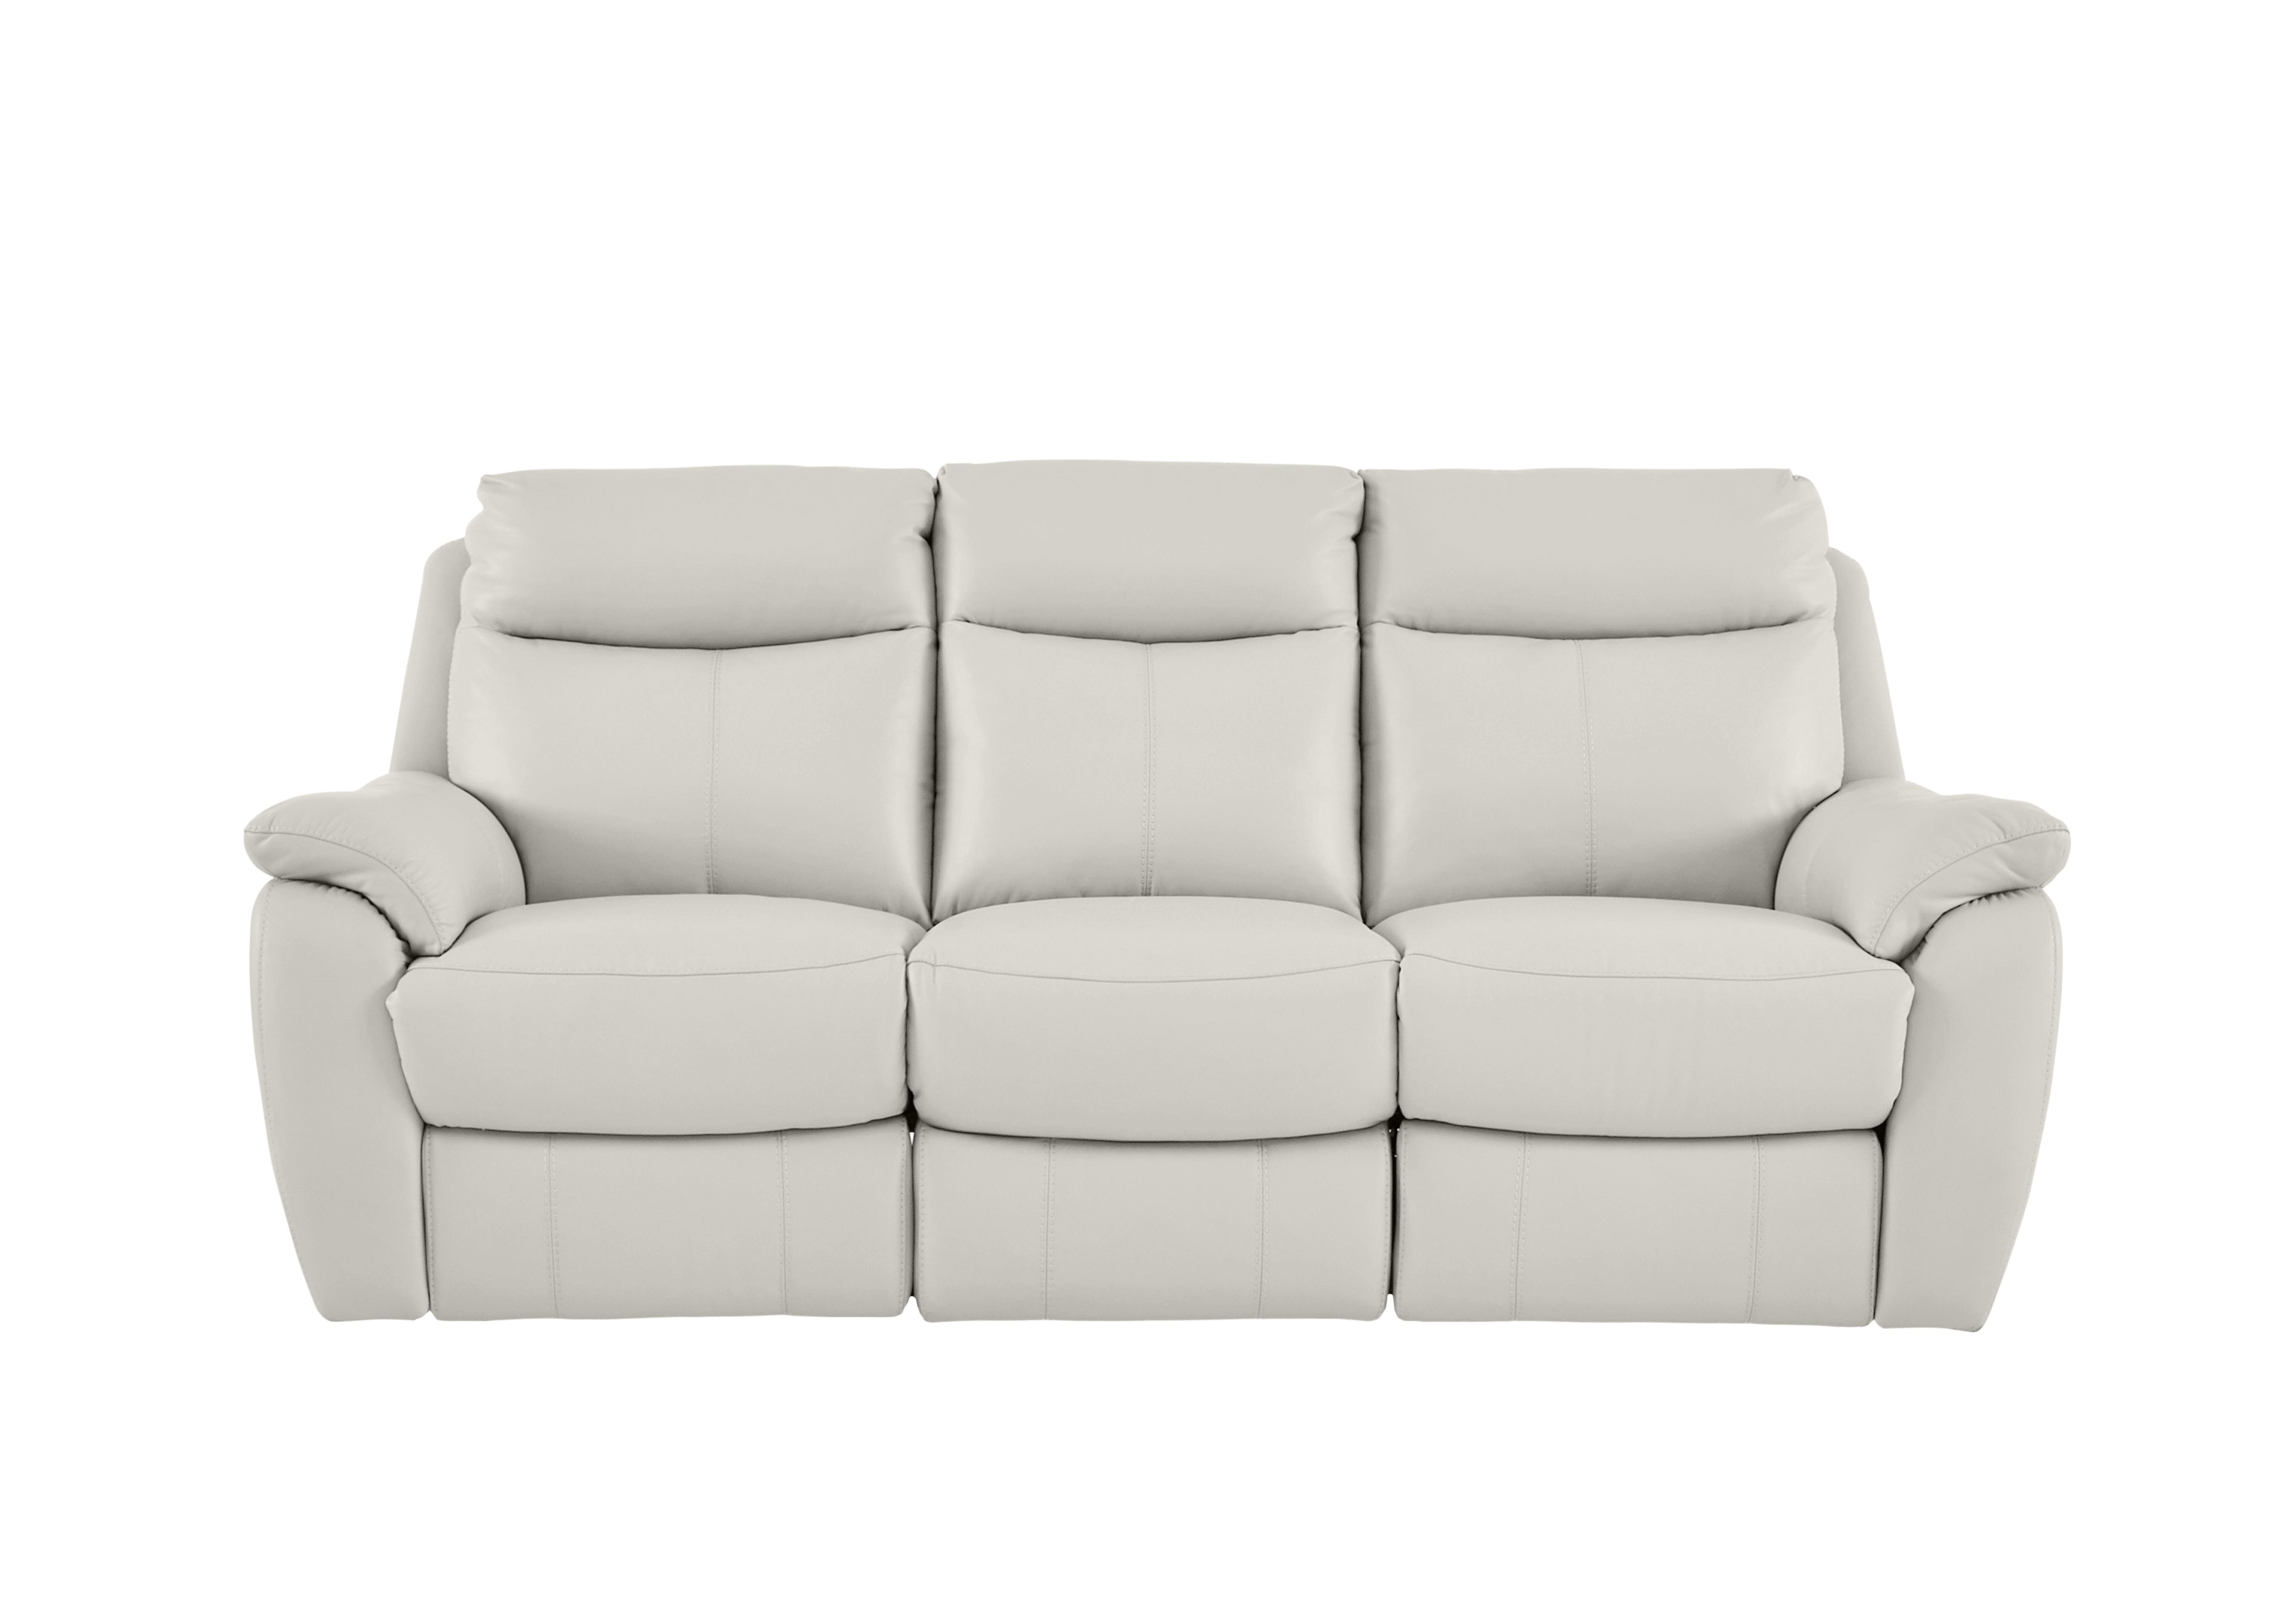 Snug 3 Seater Leather Sofa in Bv-156e Frost on Furniture Village